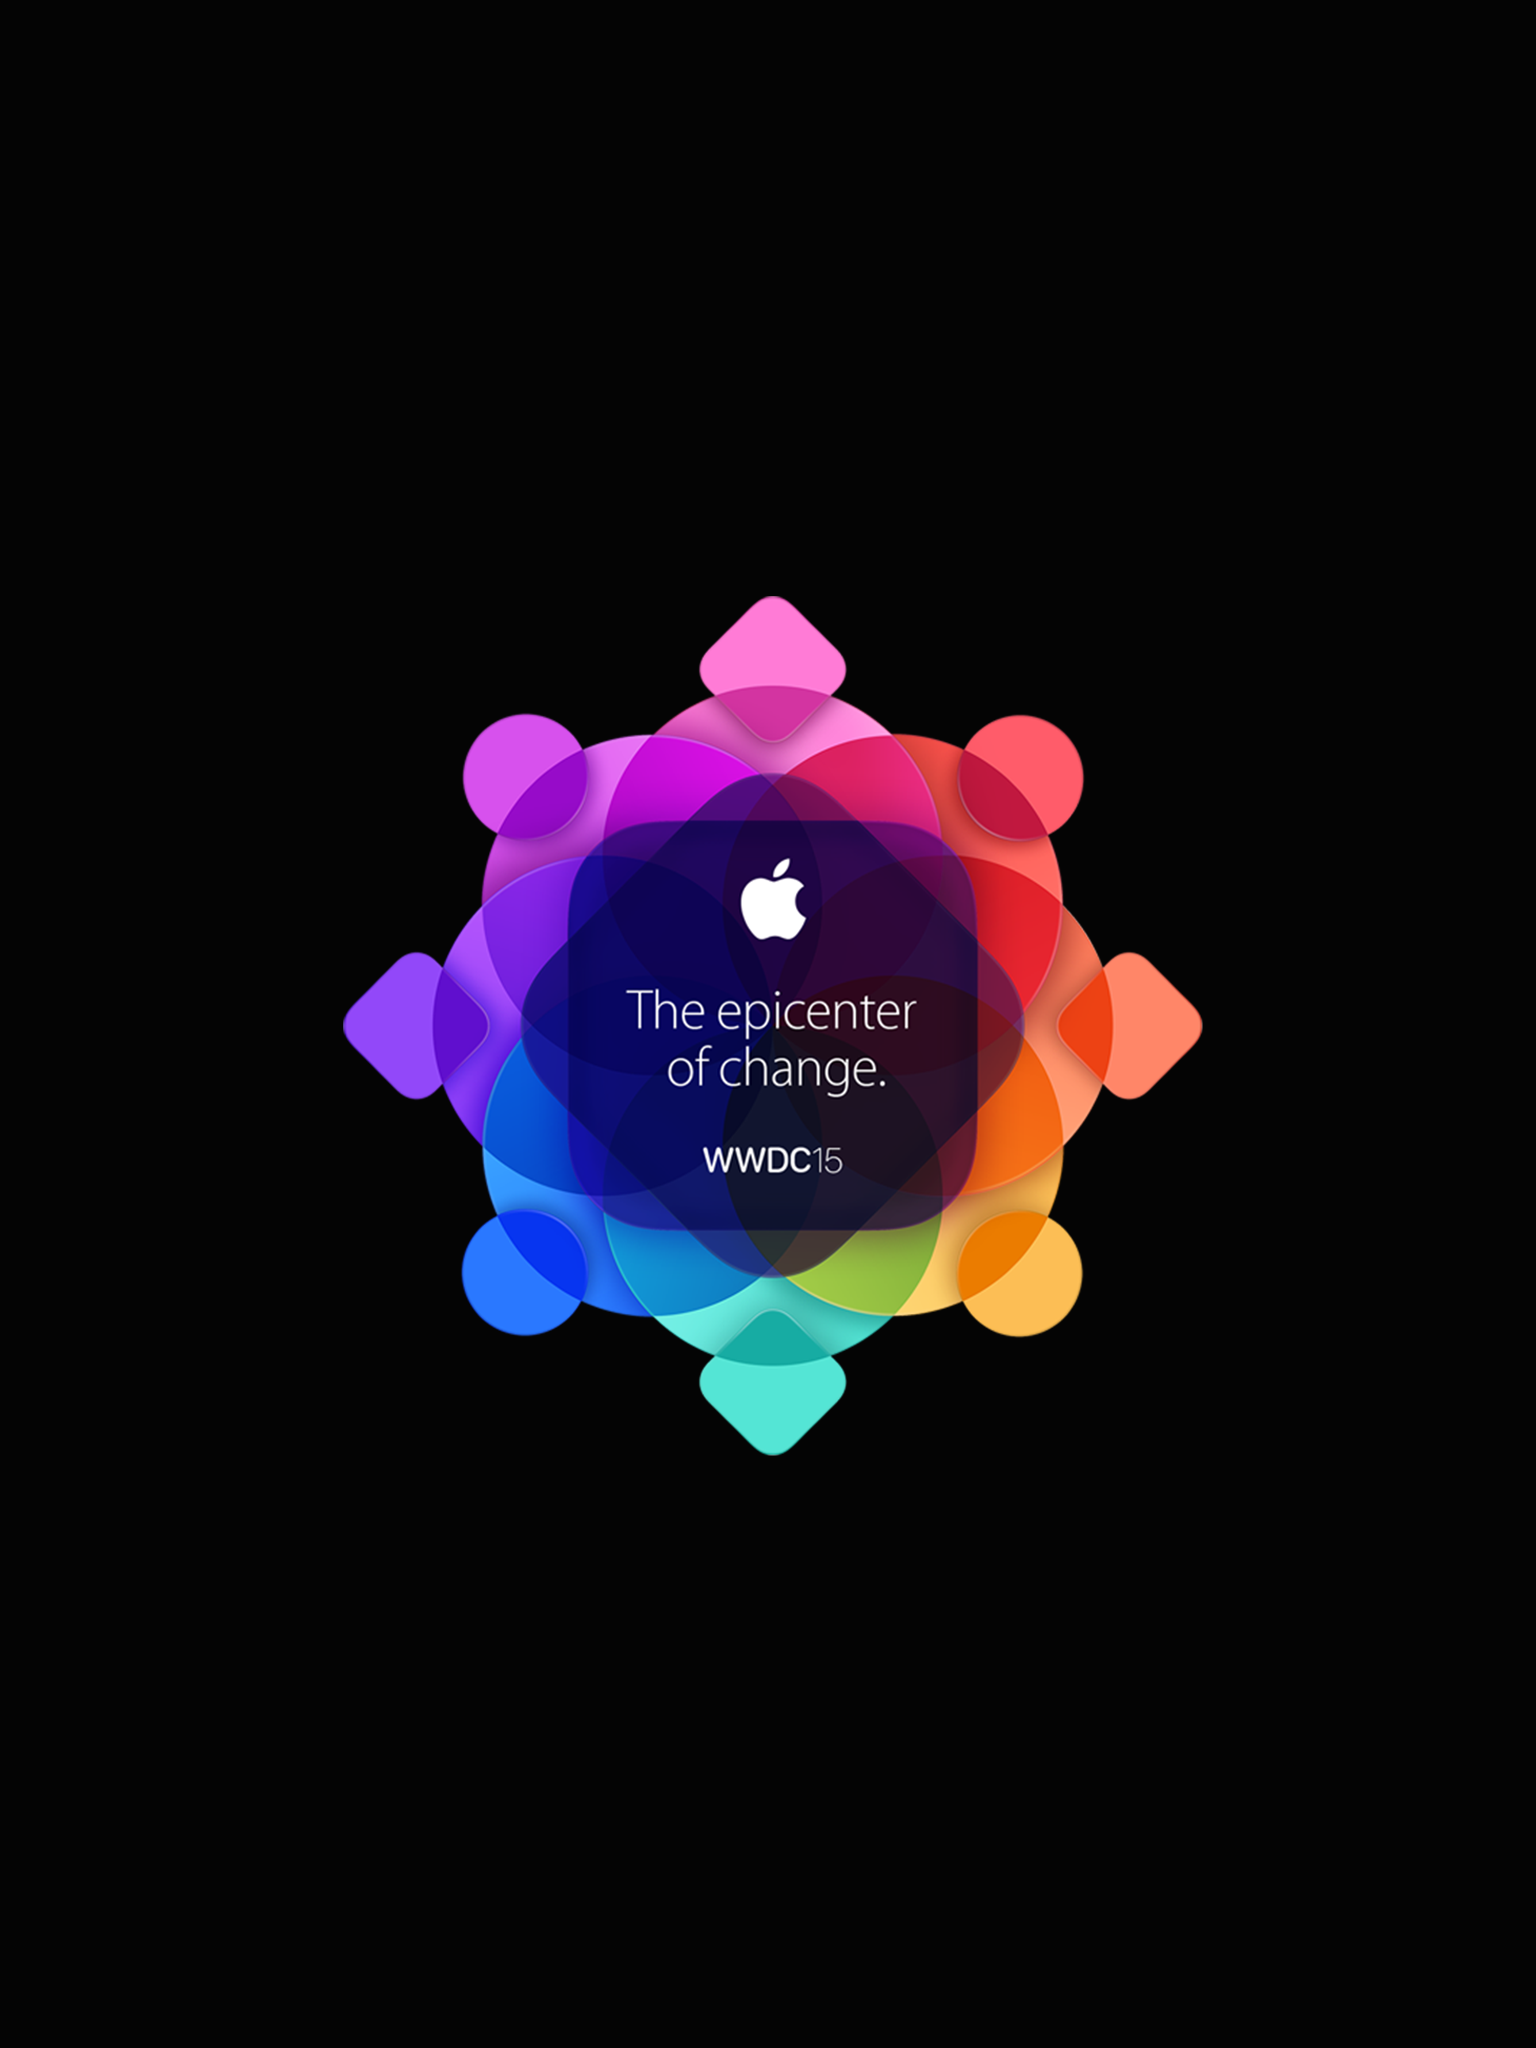 WWDC 2015 wallpapers: the epicenter of change